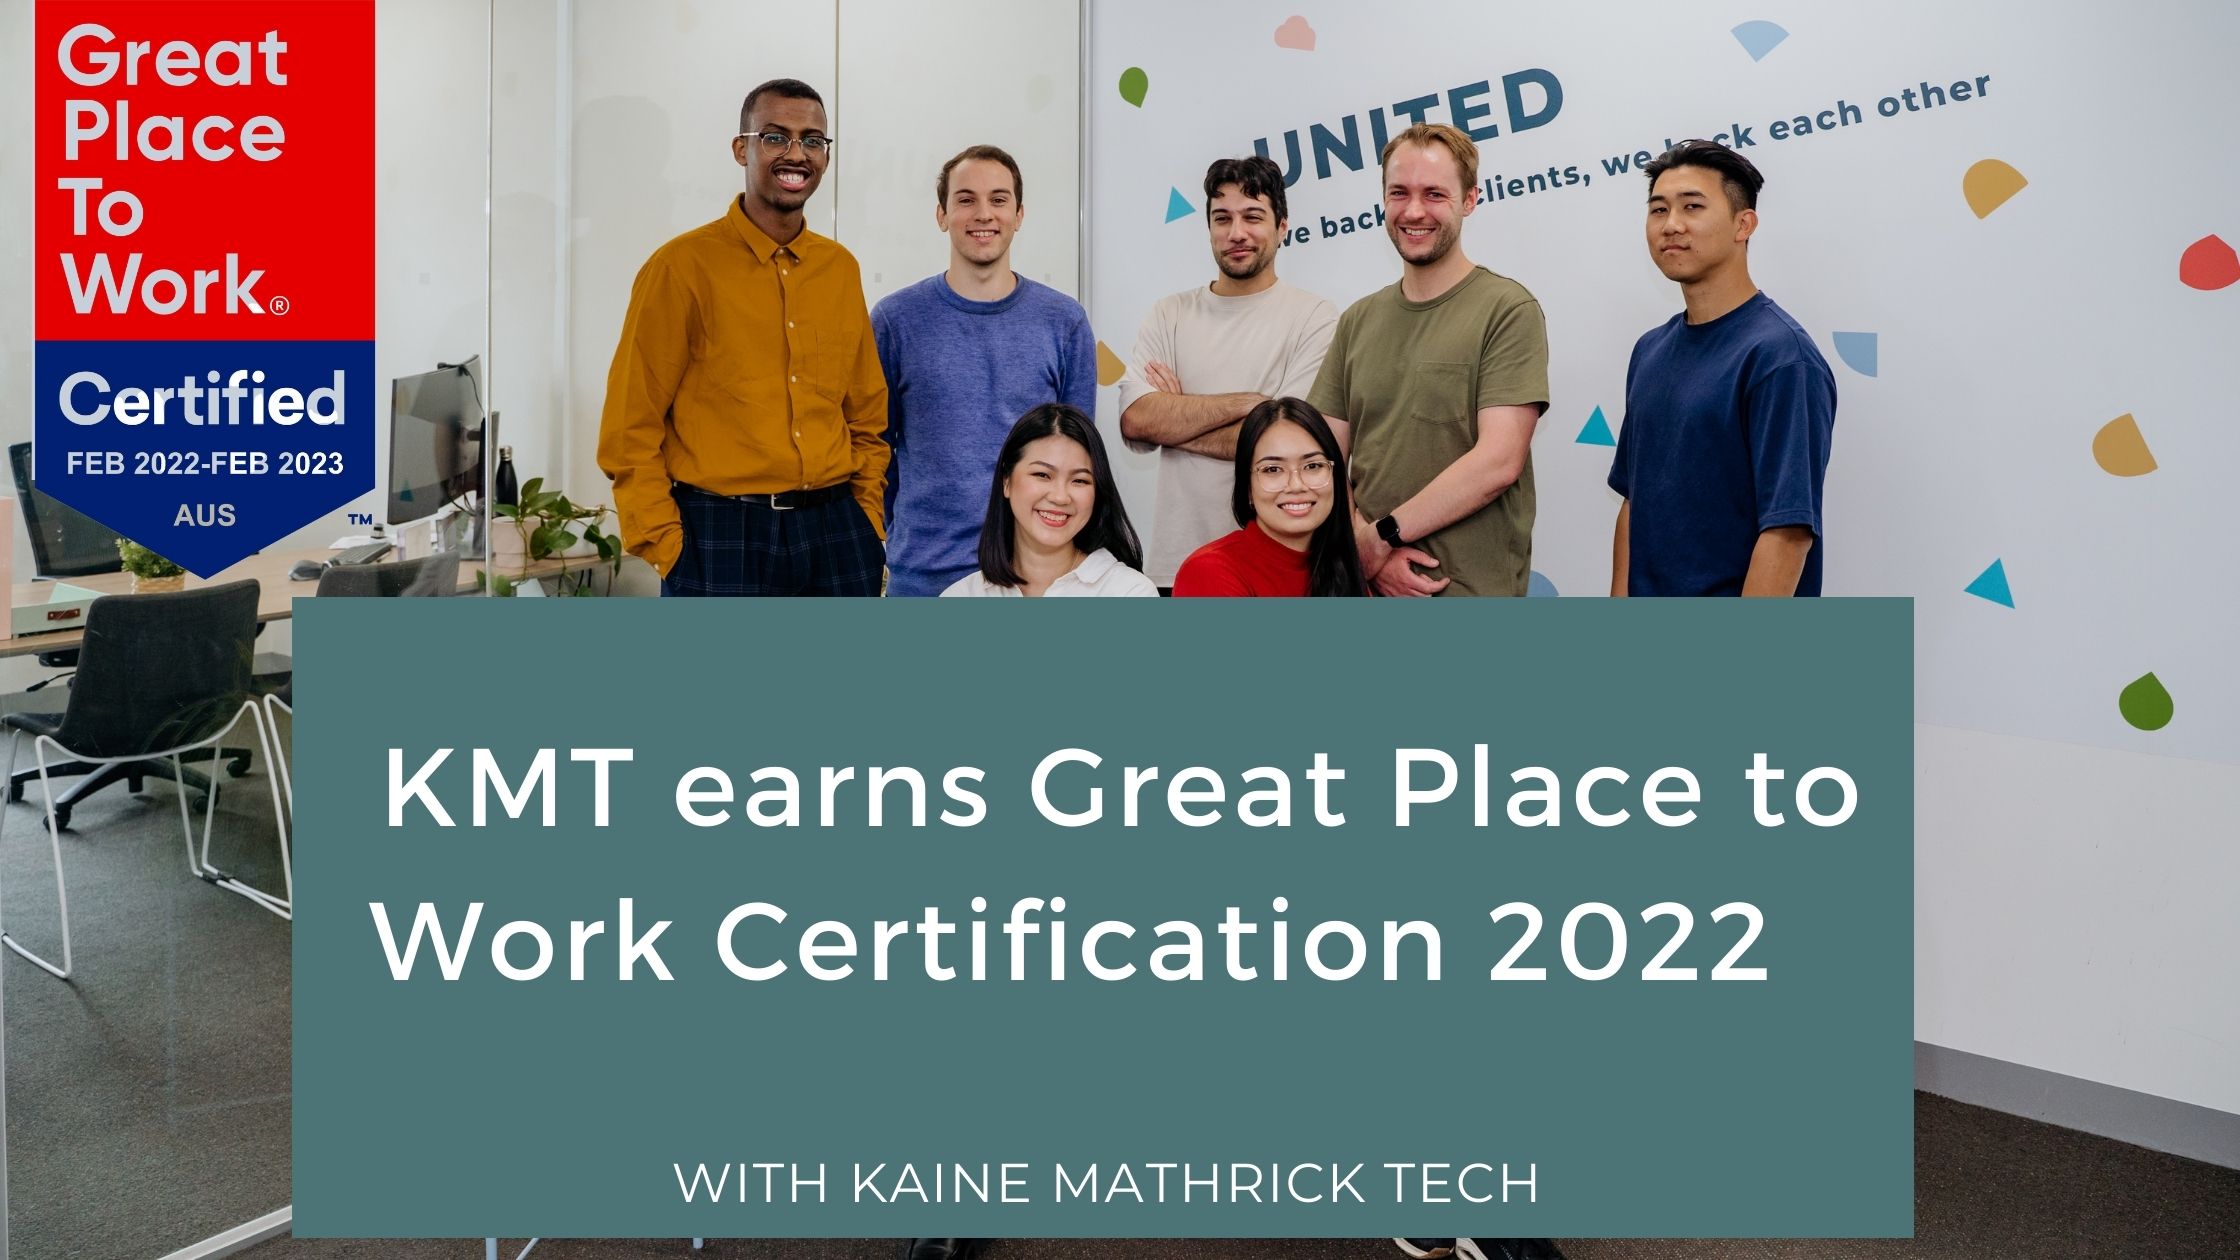 Great Place to Work 2022 Certified